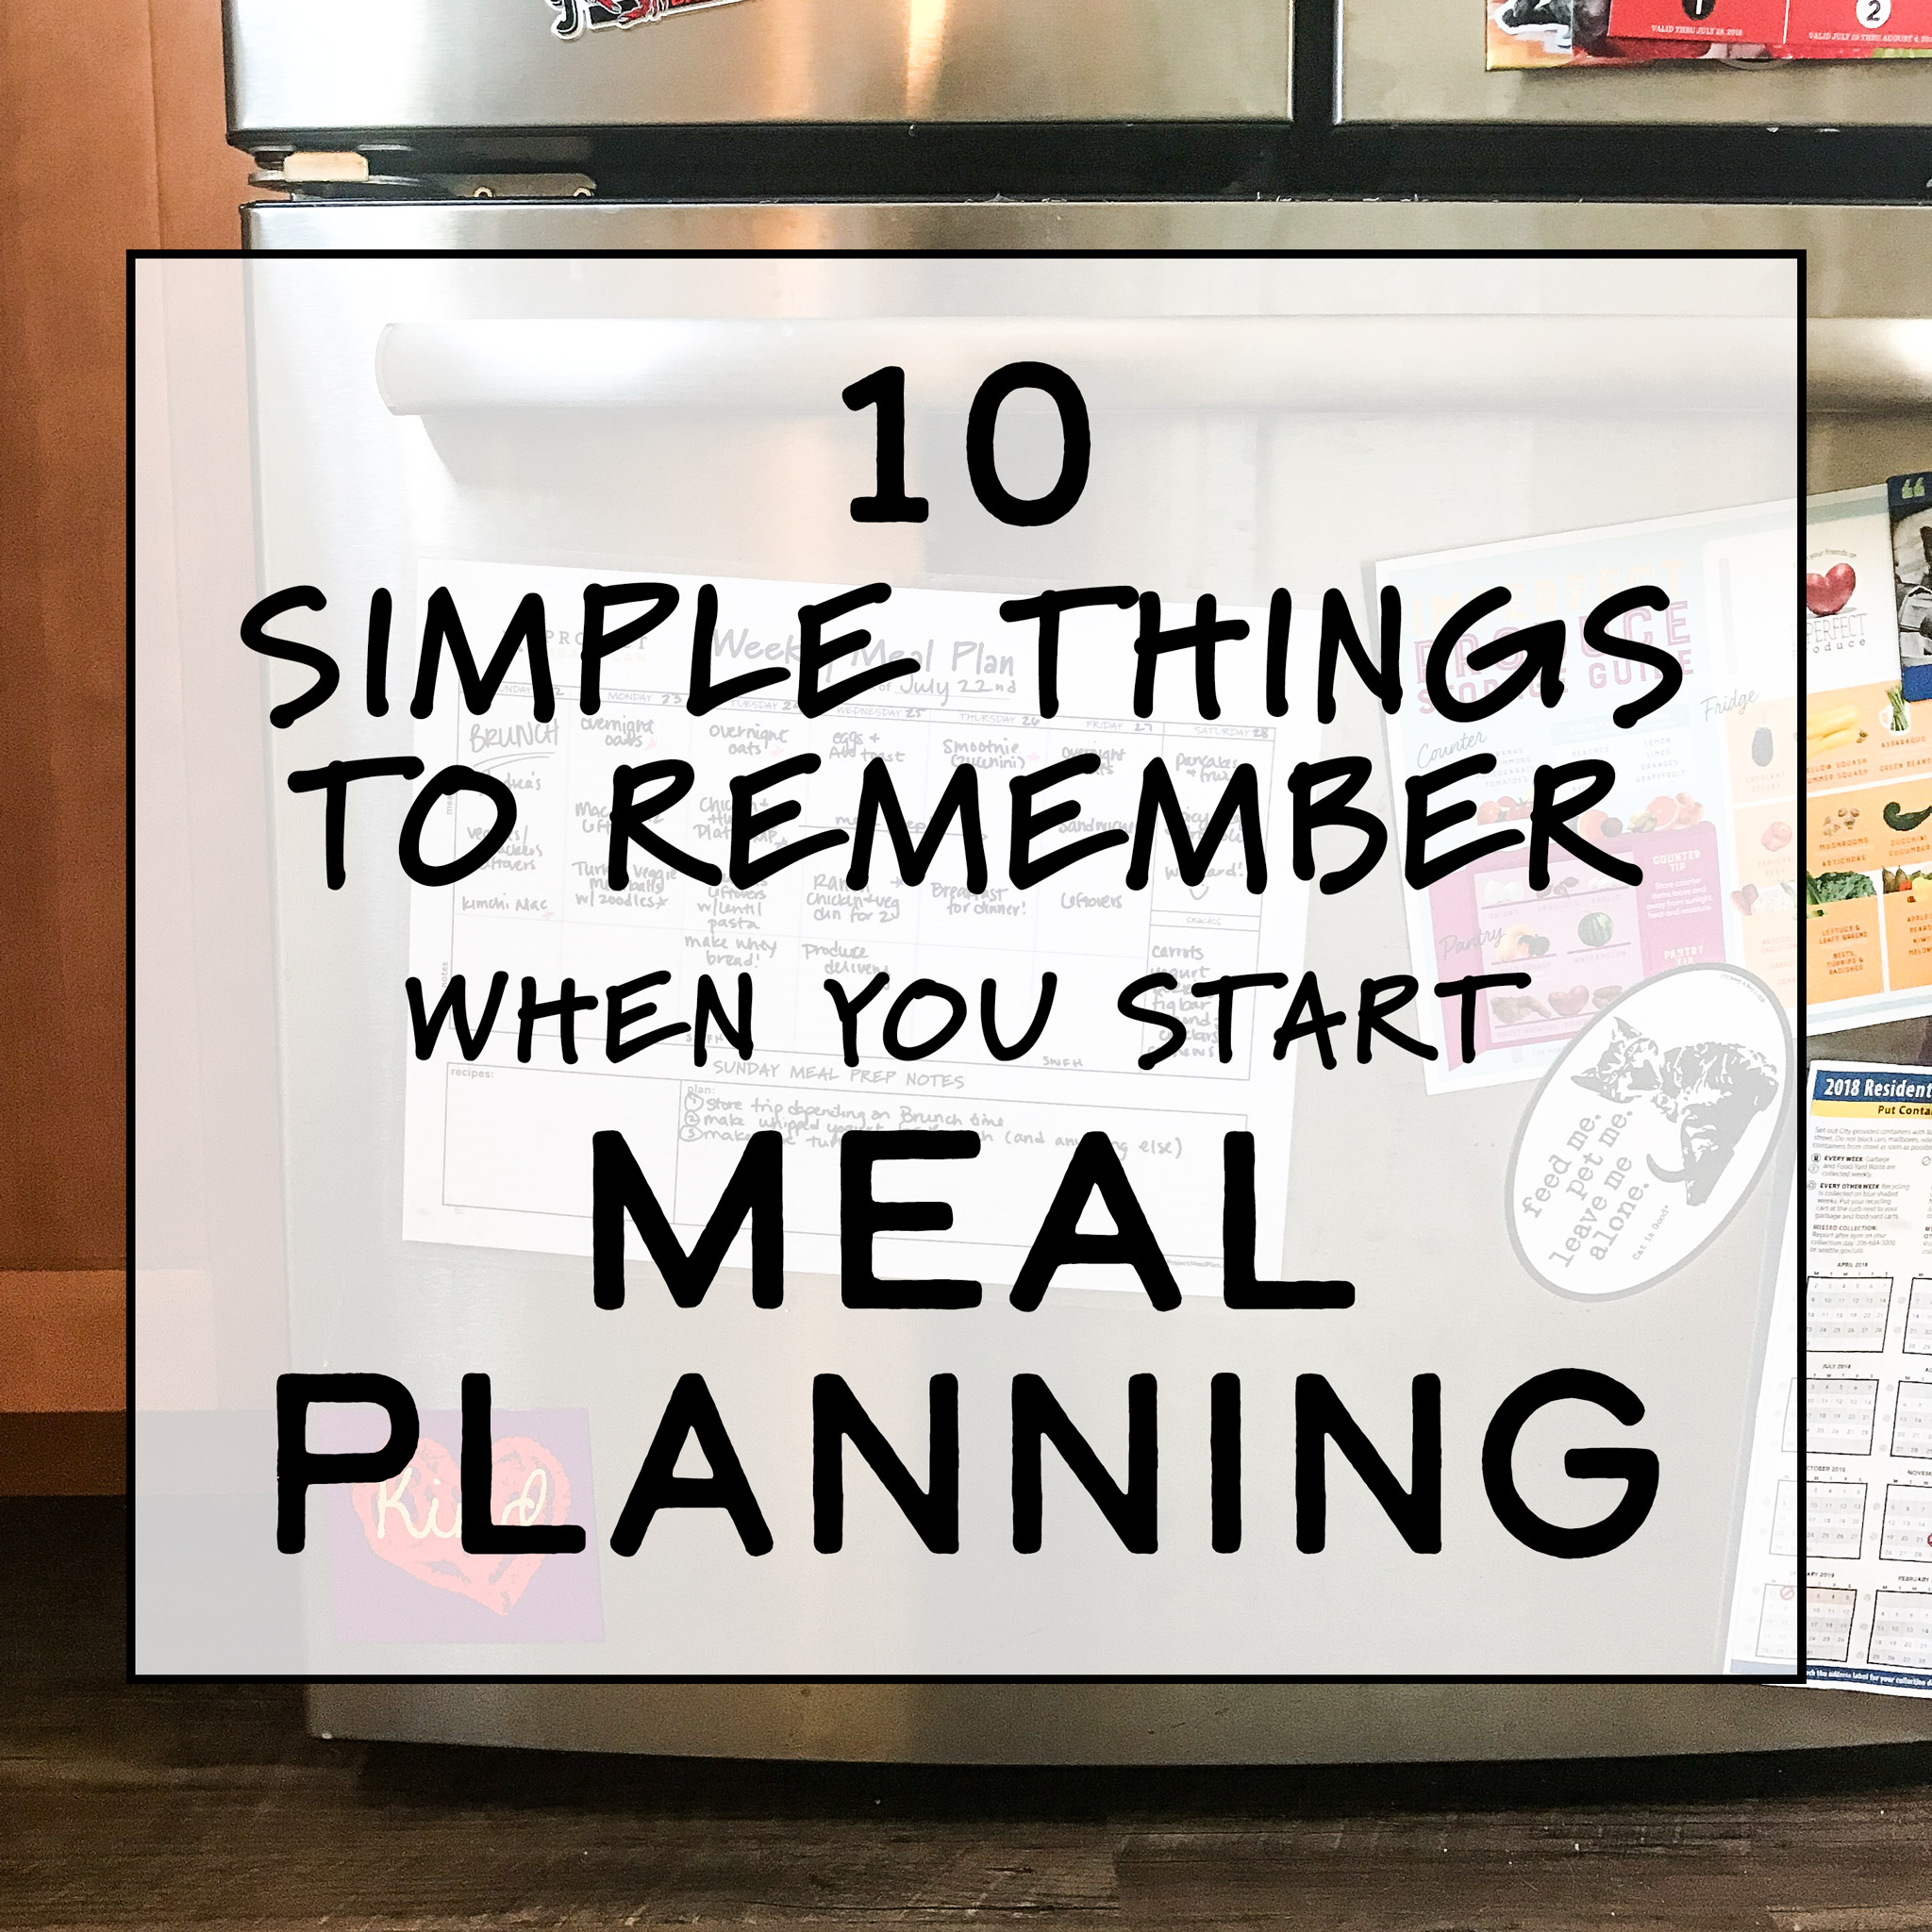 10 Simple Things to Remember When You Start Meal Planning